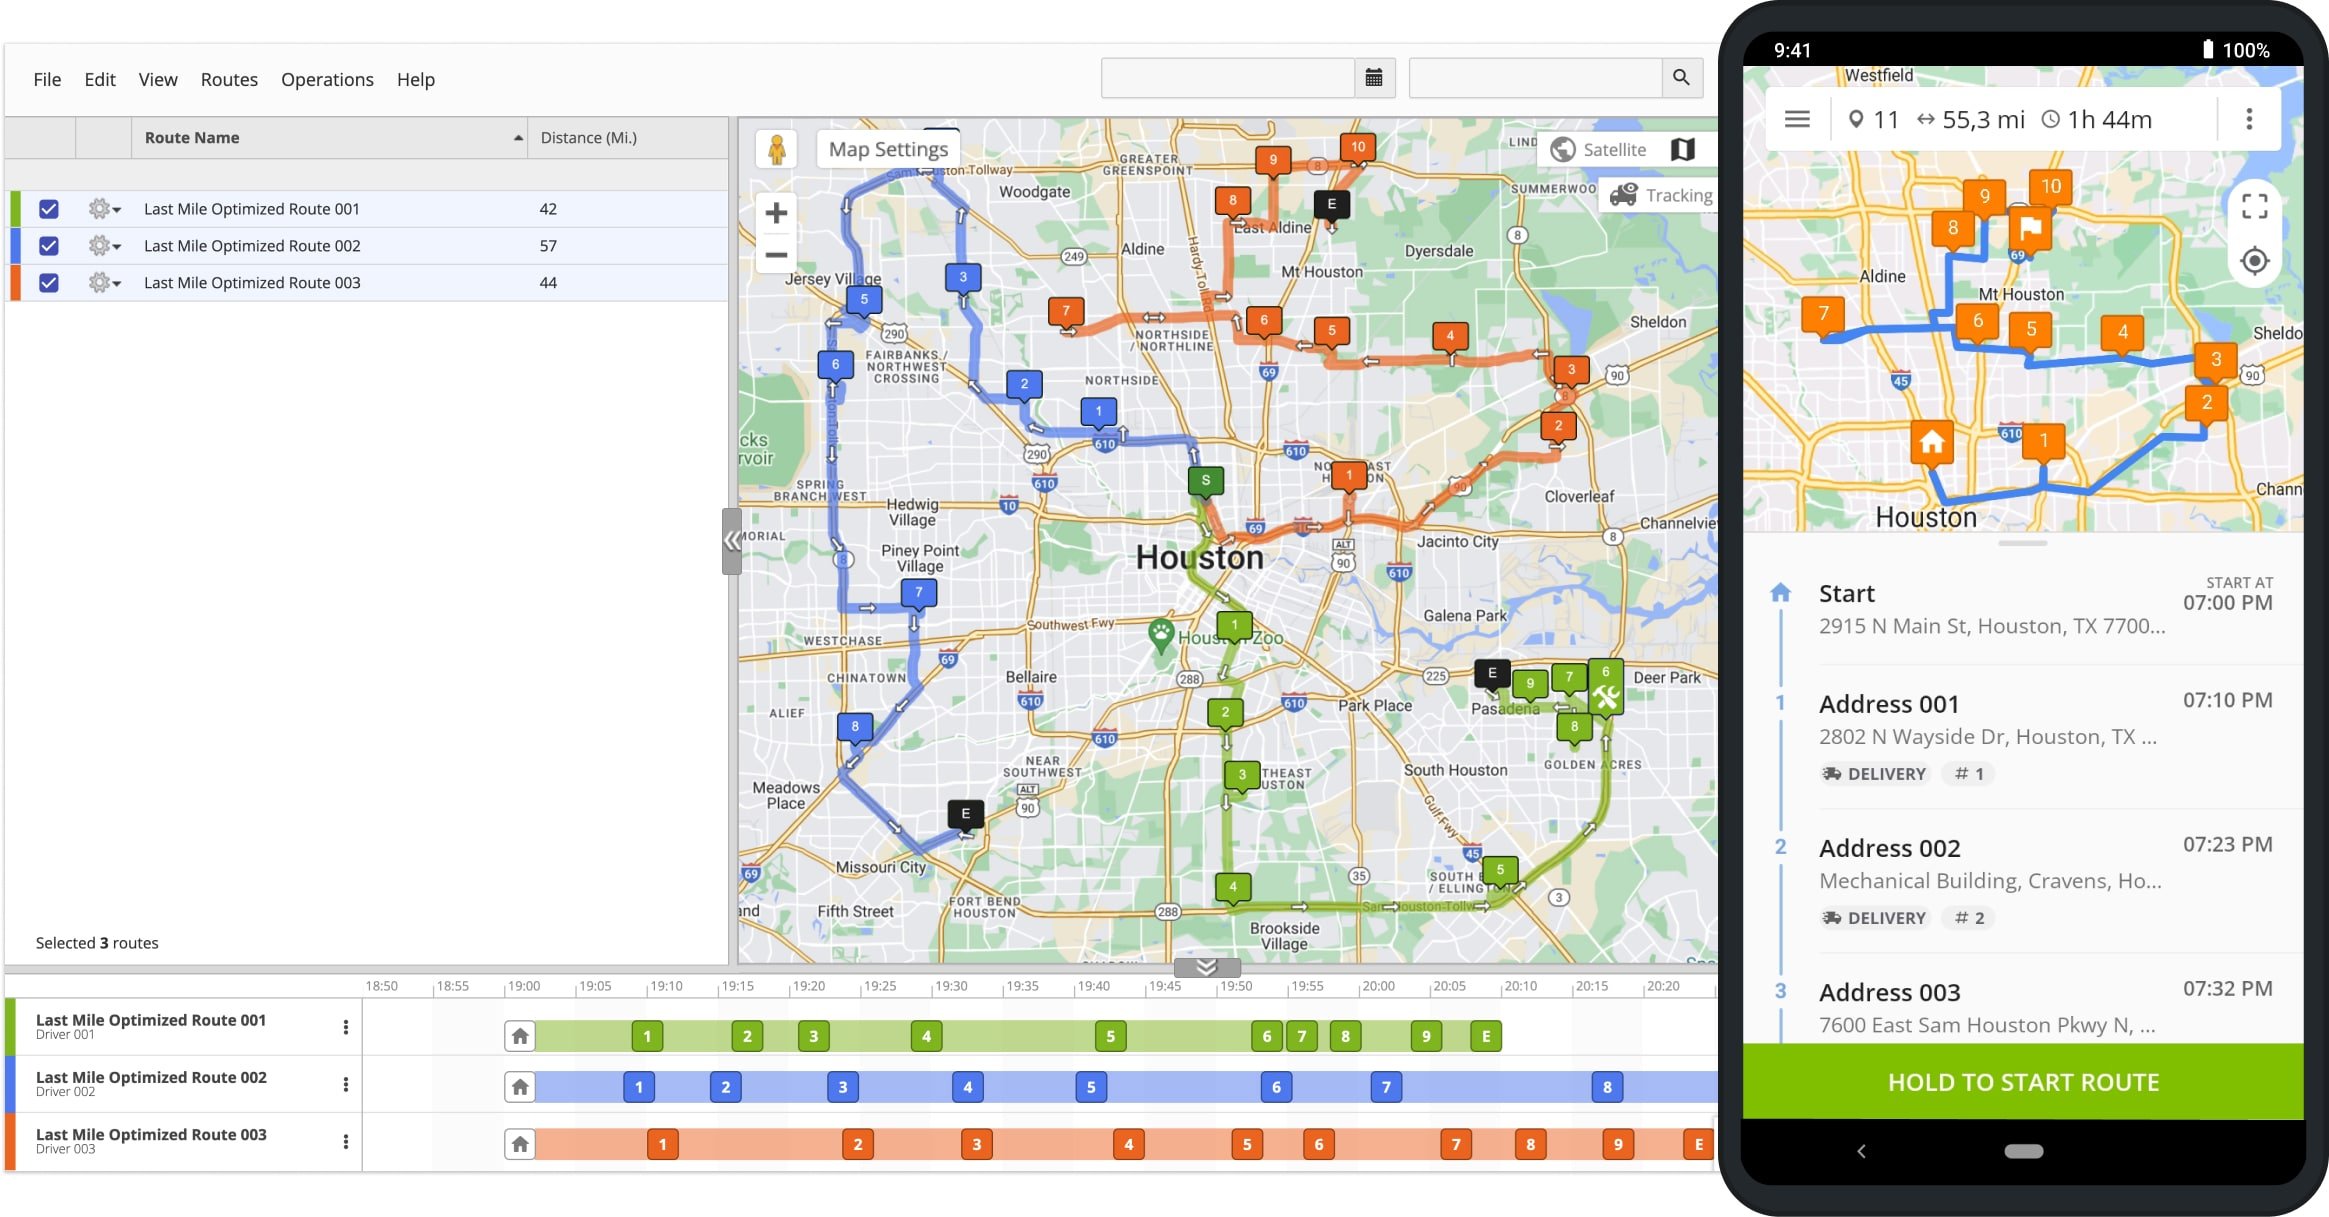 Route4Me syncs all changes made on the Routes Map to the Mobile Route Planner app for Android and iPhone. Any modifications made to routes or destinations are synchronized in real-time.